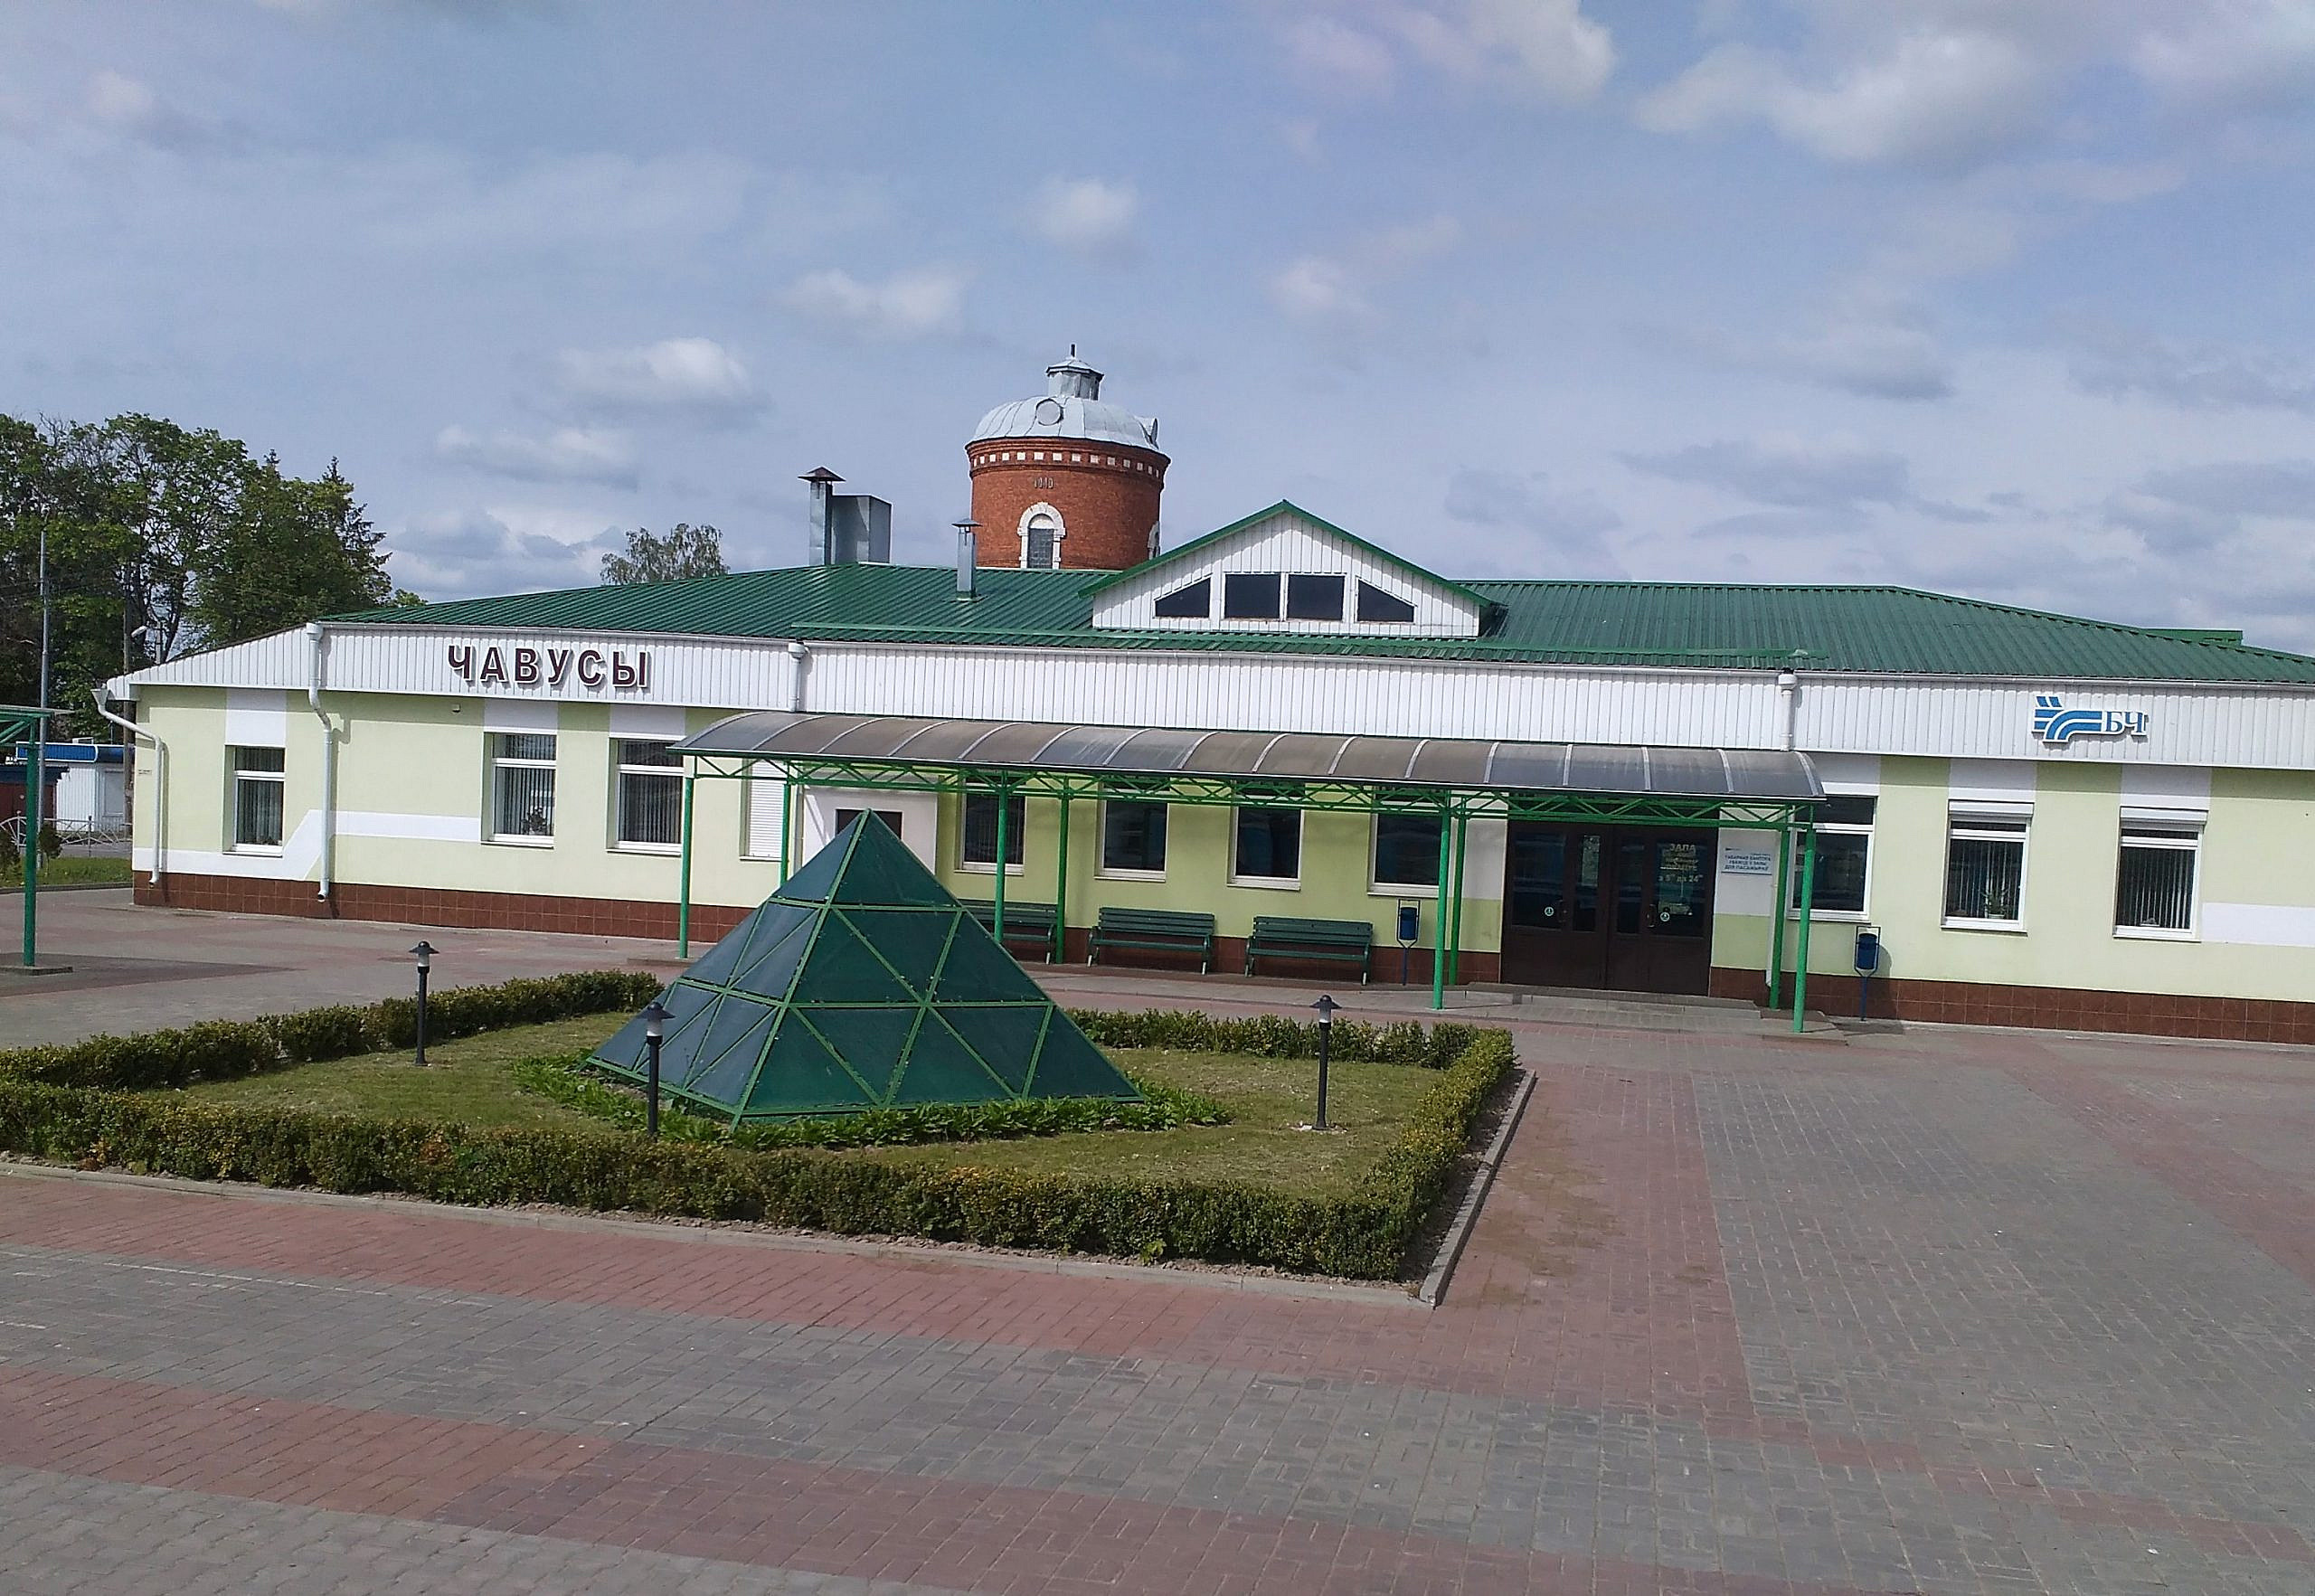 Train Station in Chausy, Belarus